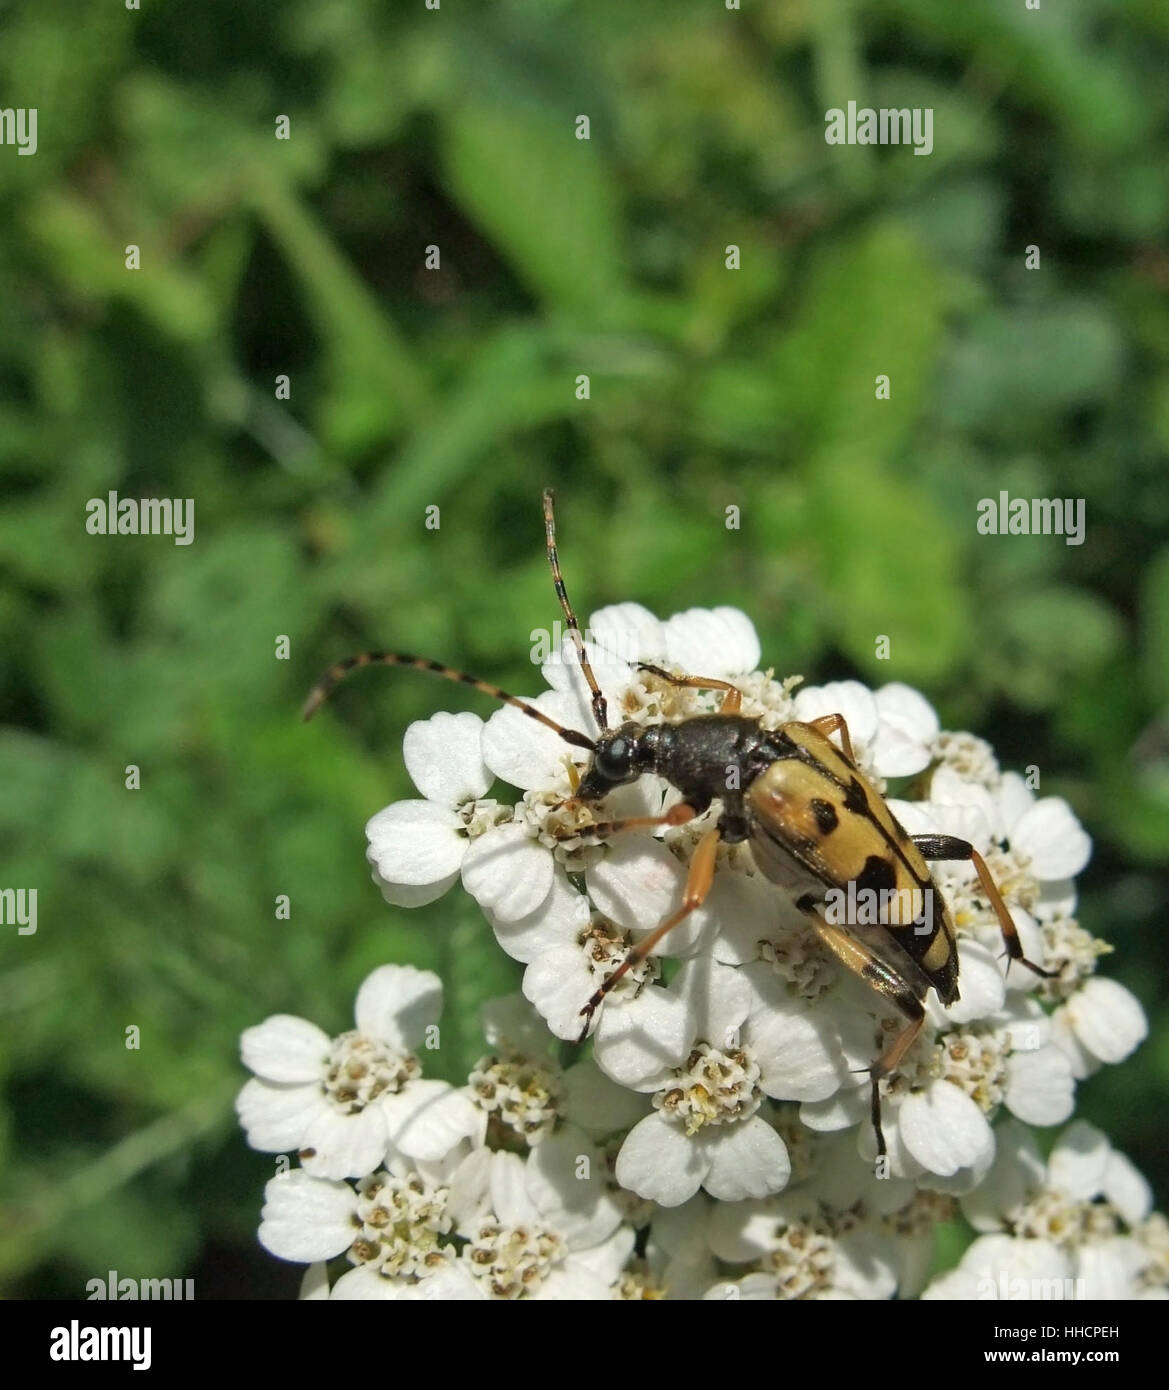 a longicorn beetle sitting on white flowers in front of green blurry vegetation Stock Photo